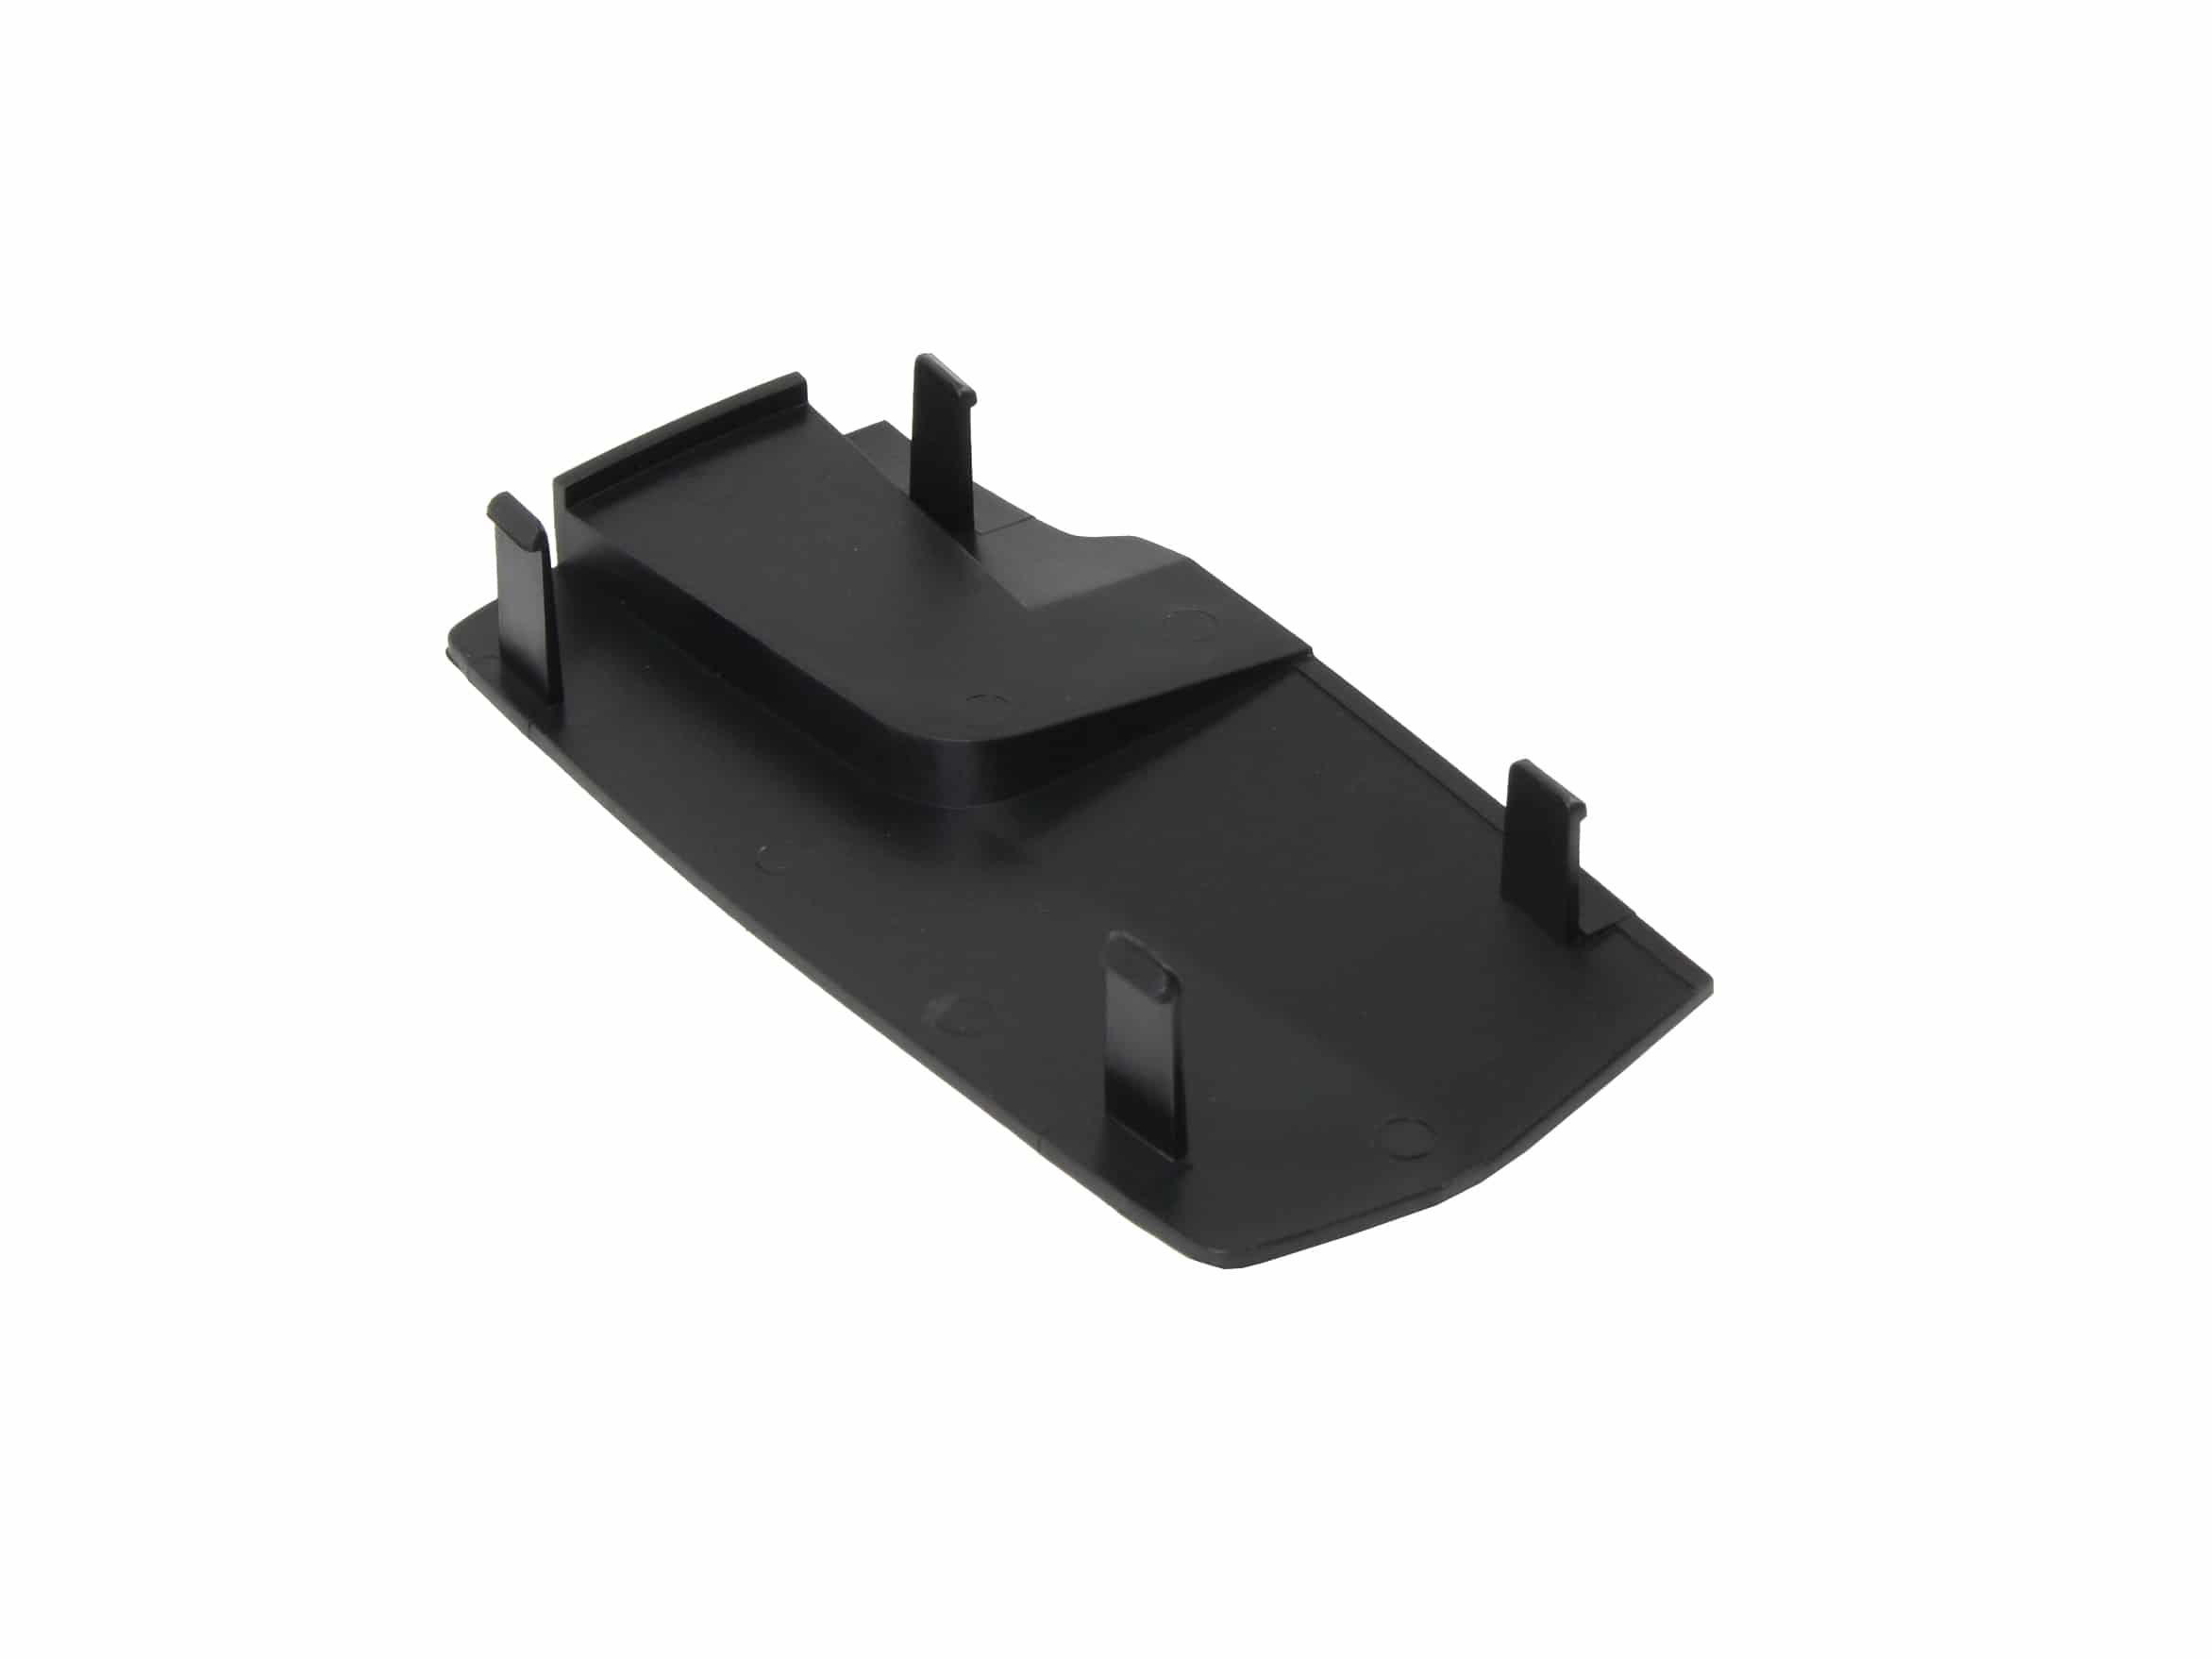 Plastic cover right for the Hepco & Becker Easyrack